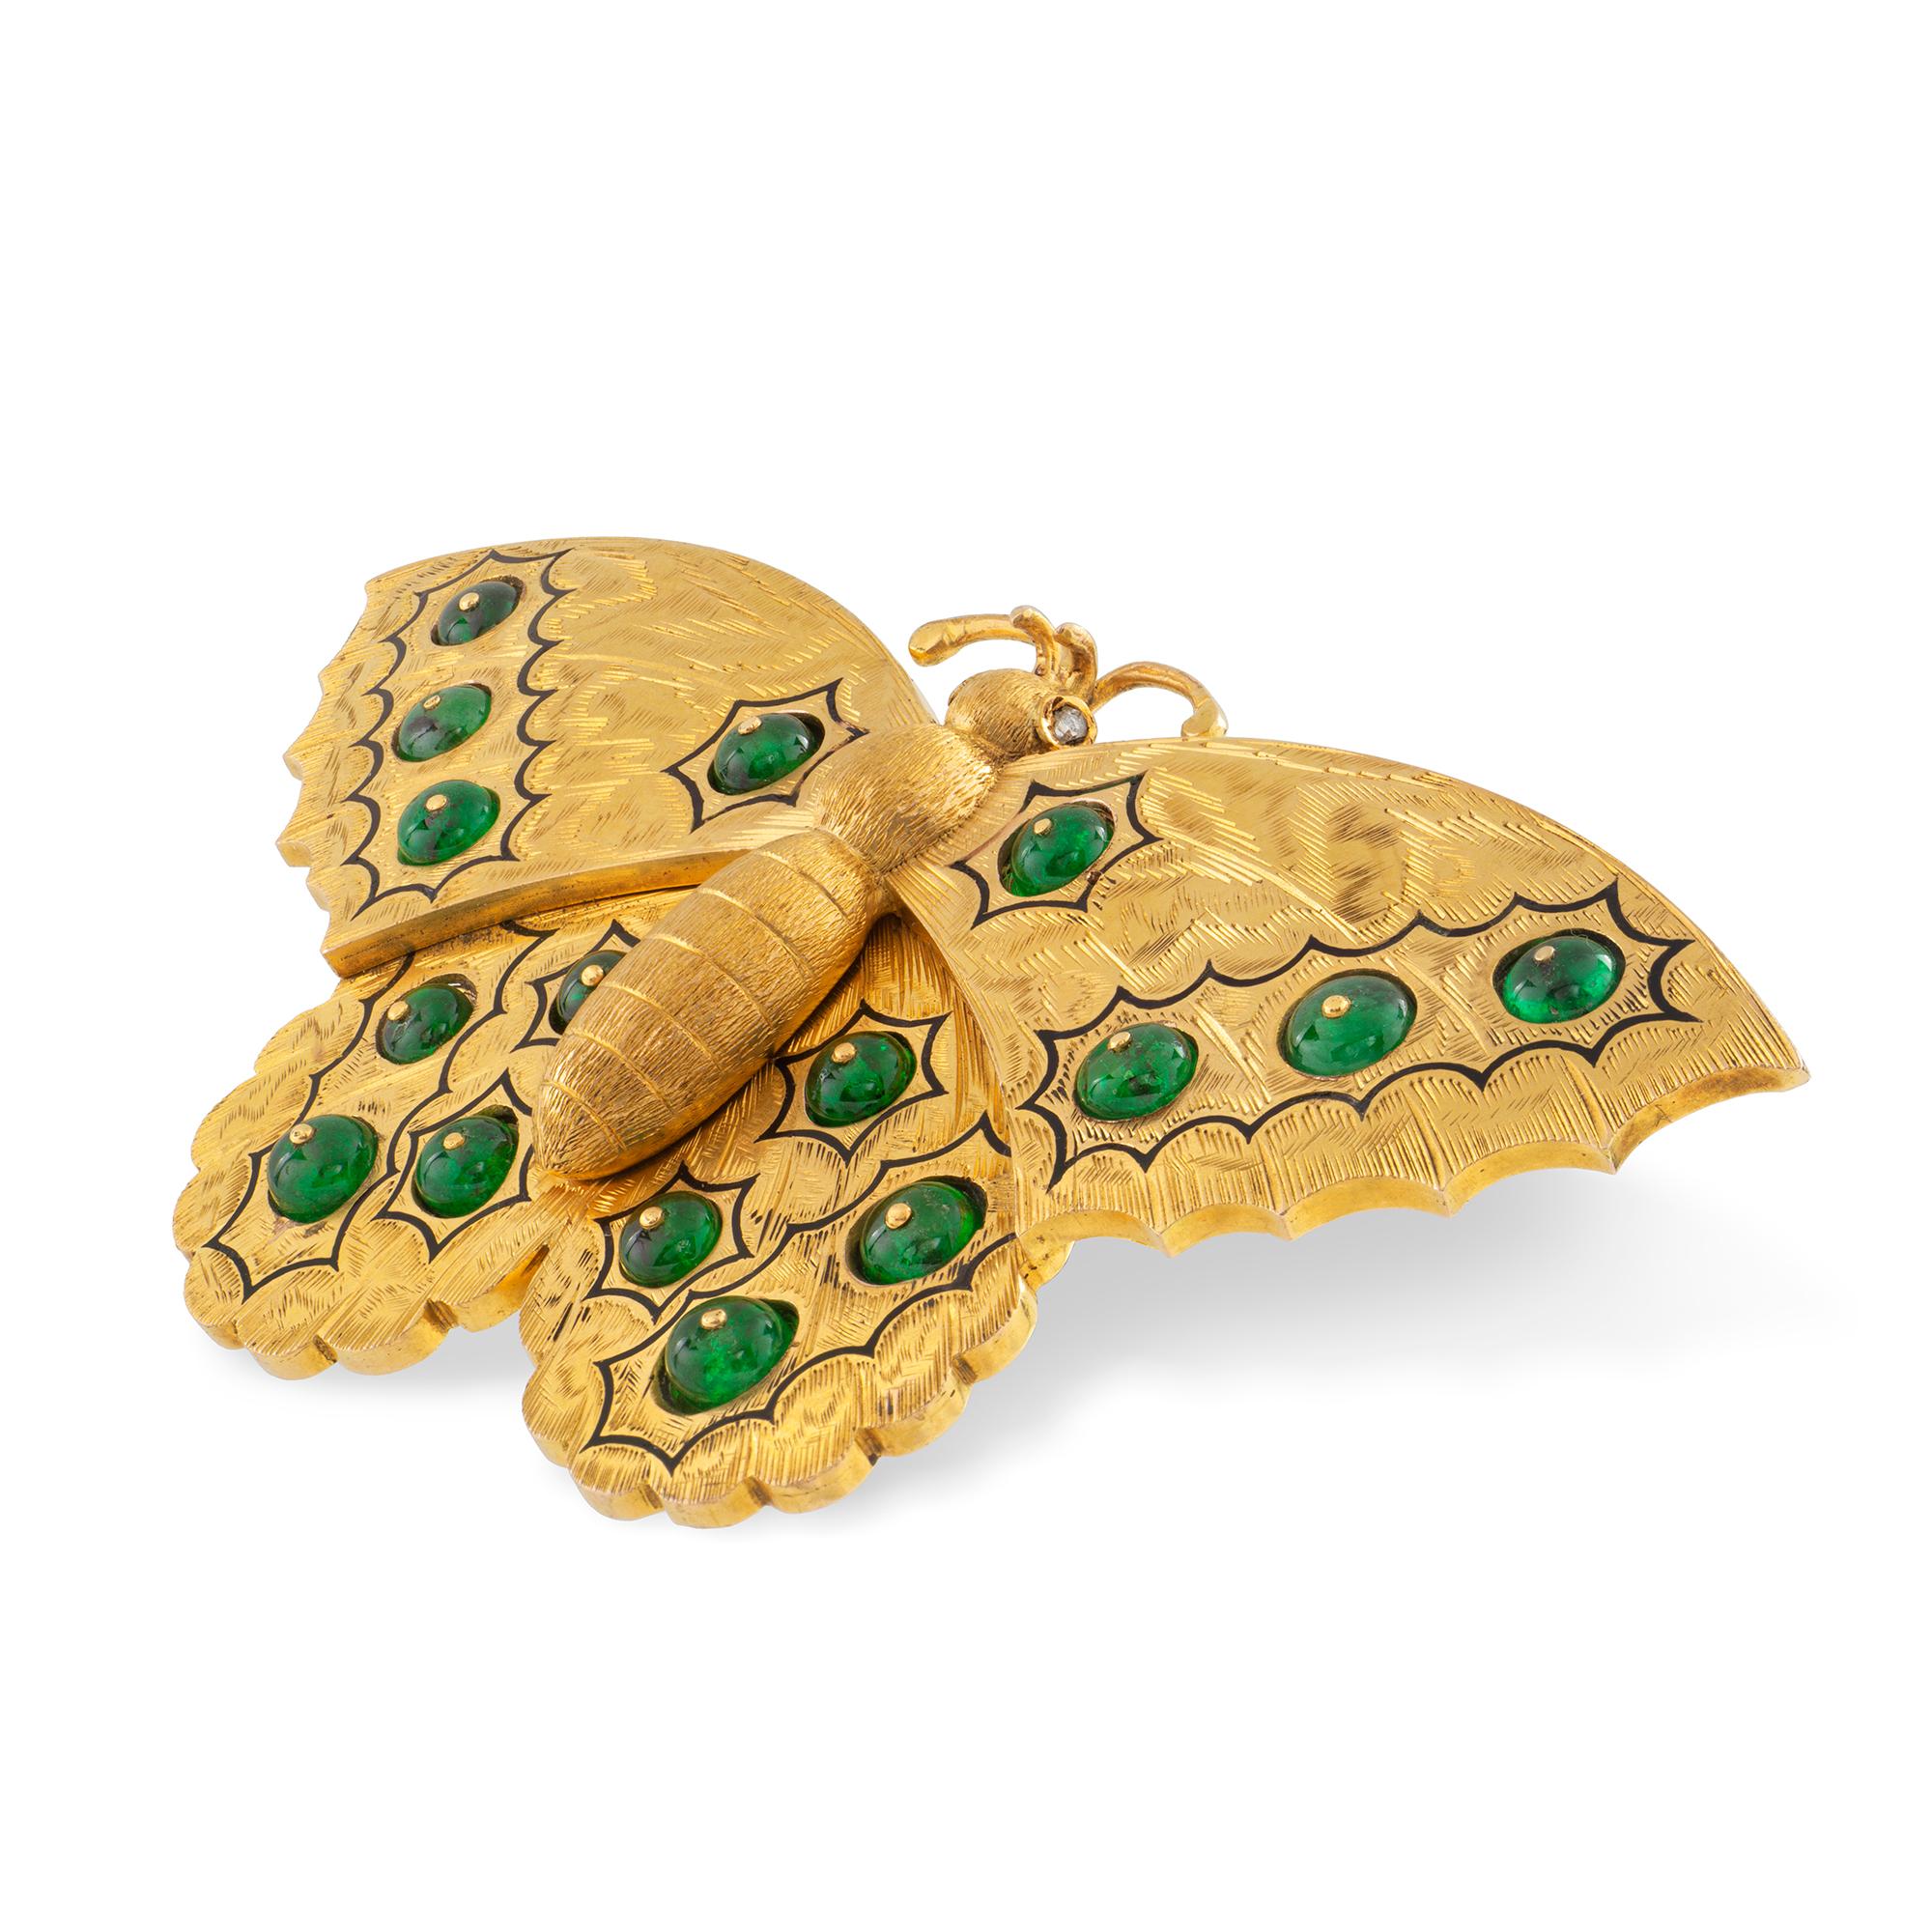 An antique Russian gold and emerald butterfly brooch, the wings set with sixteen emerald beads, all to a finely engraved background with black enamel decorations, all set in yellow gold mount with gold brooch fitting, measuring approximately 8x4cm,